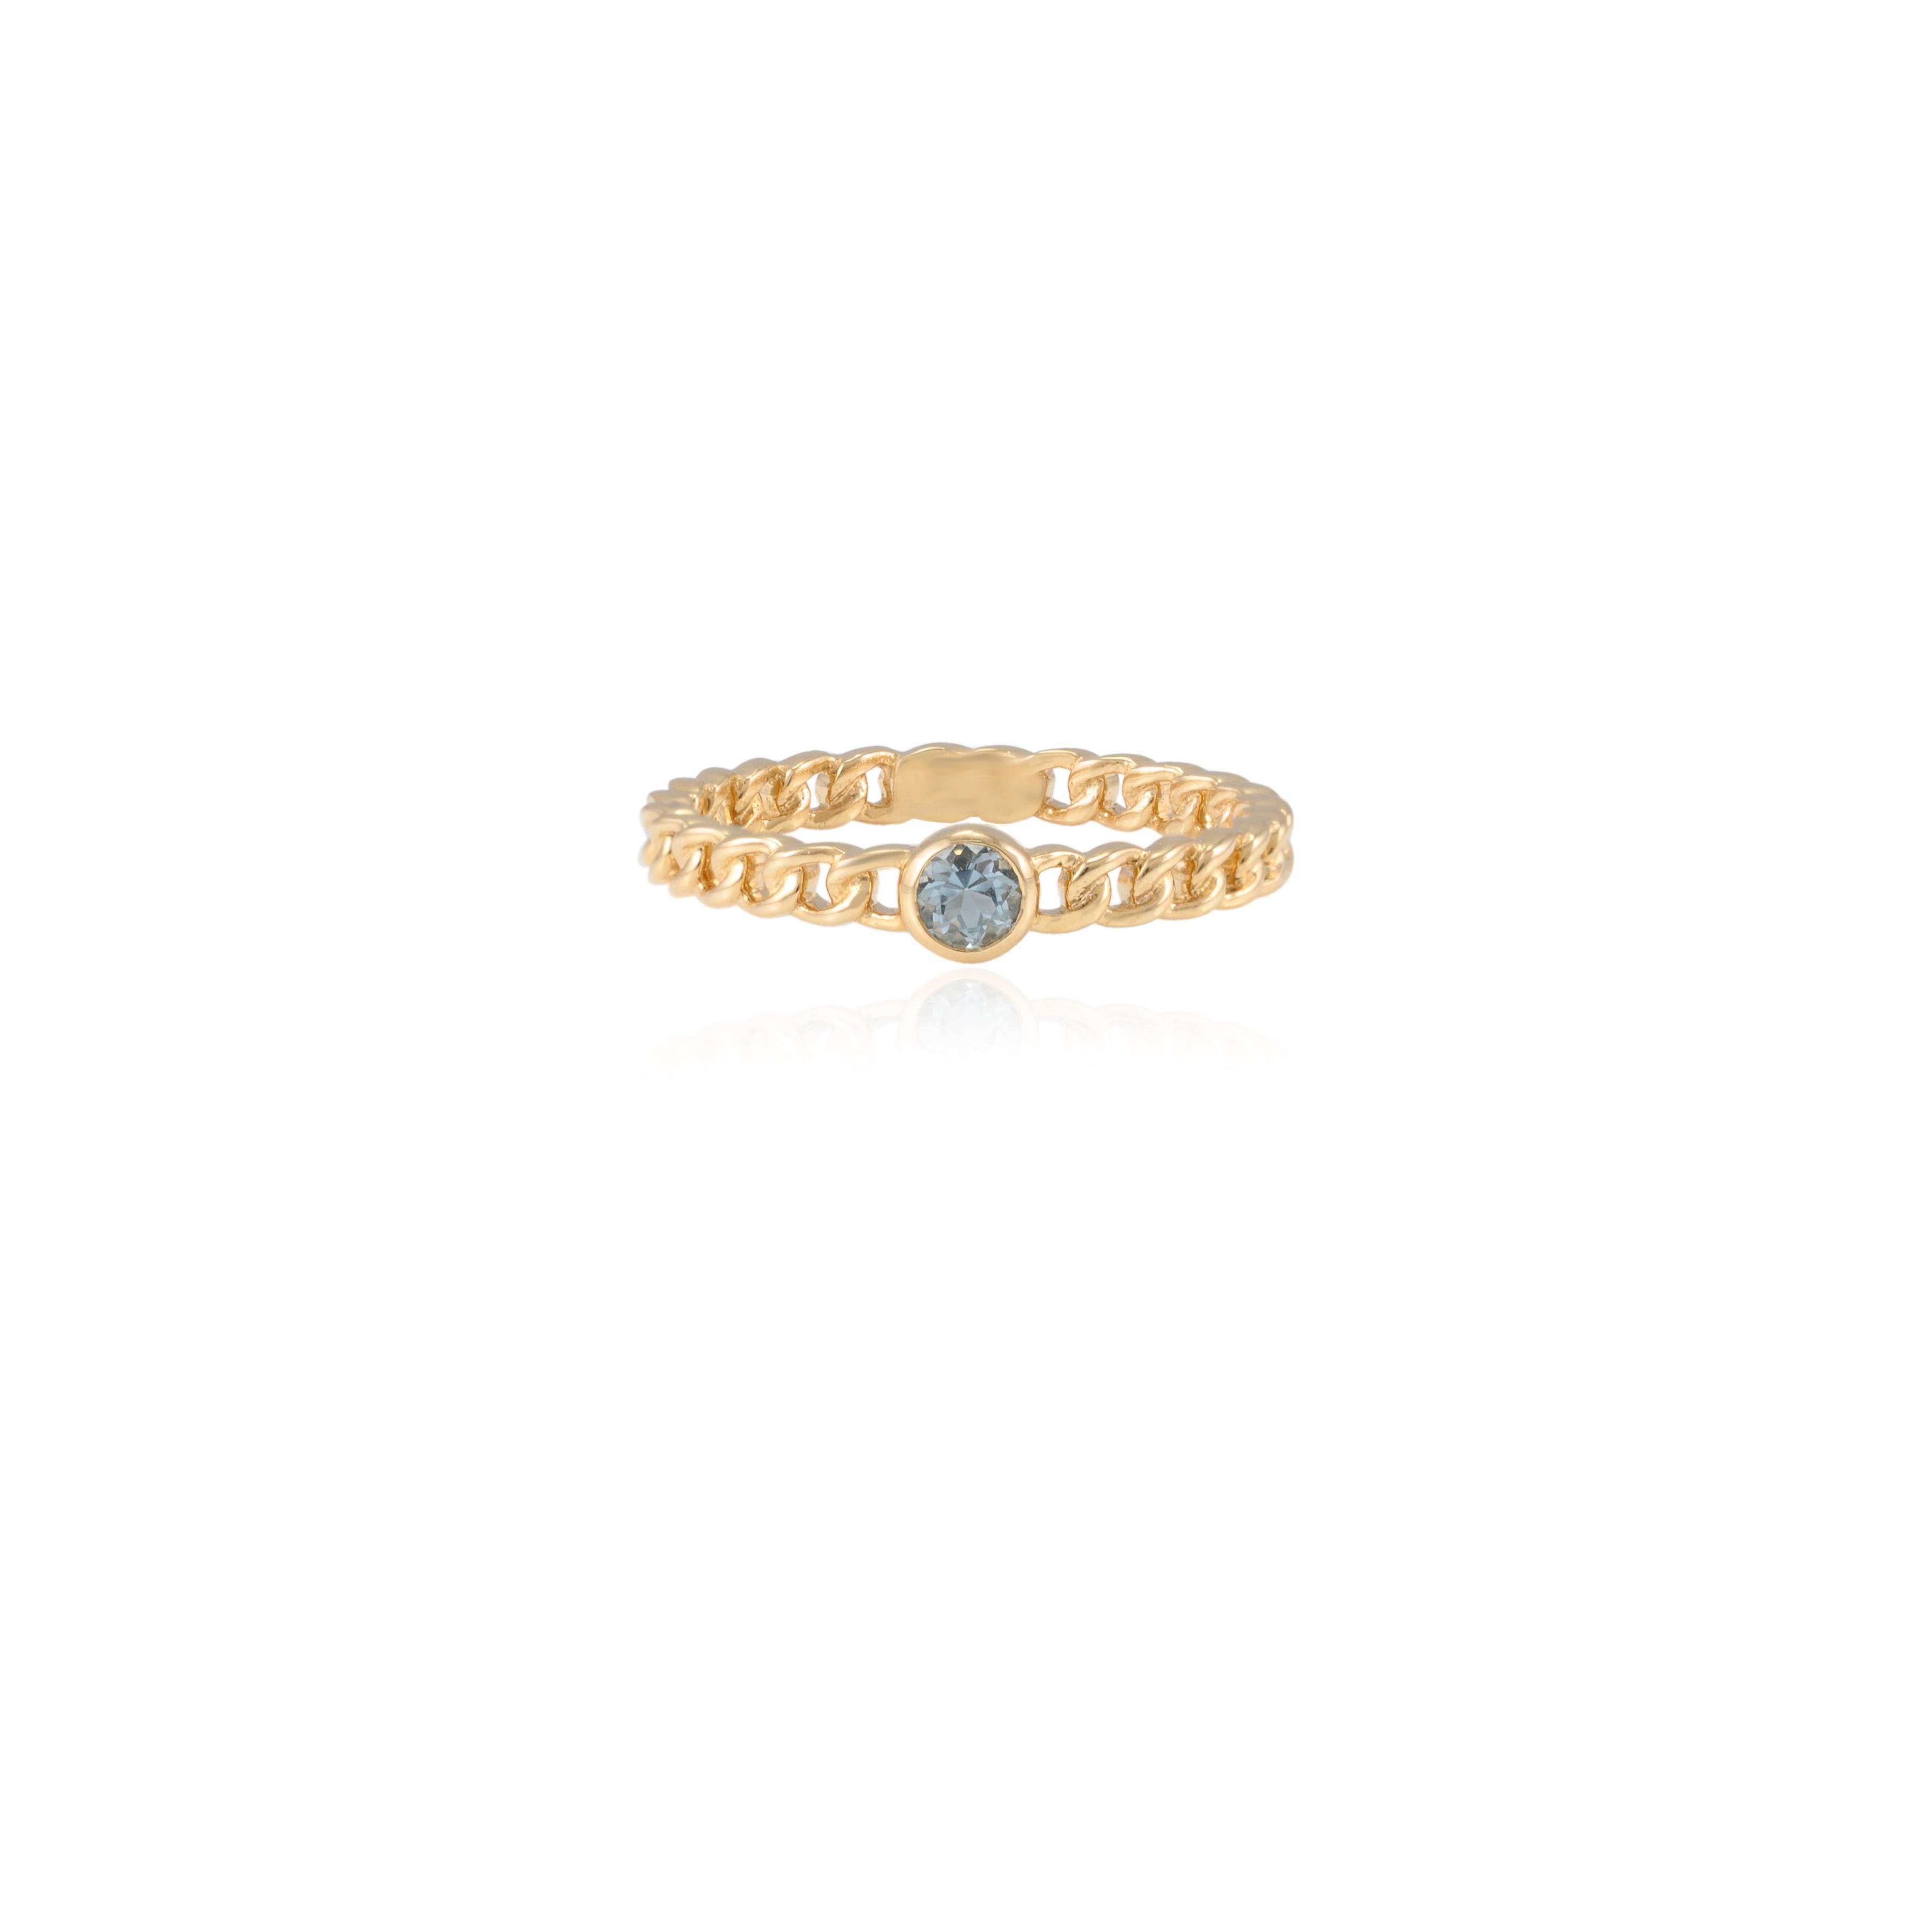 For Sale:  Everyday Blue Topaz Solitaire Curb Chain Ring in 14k Solid Yellow Gold For Her 3